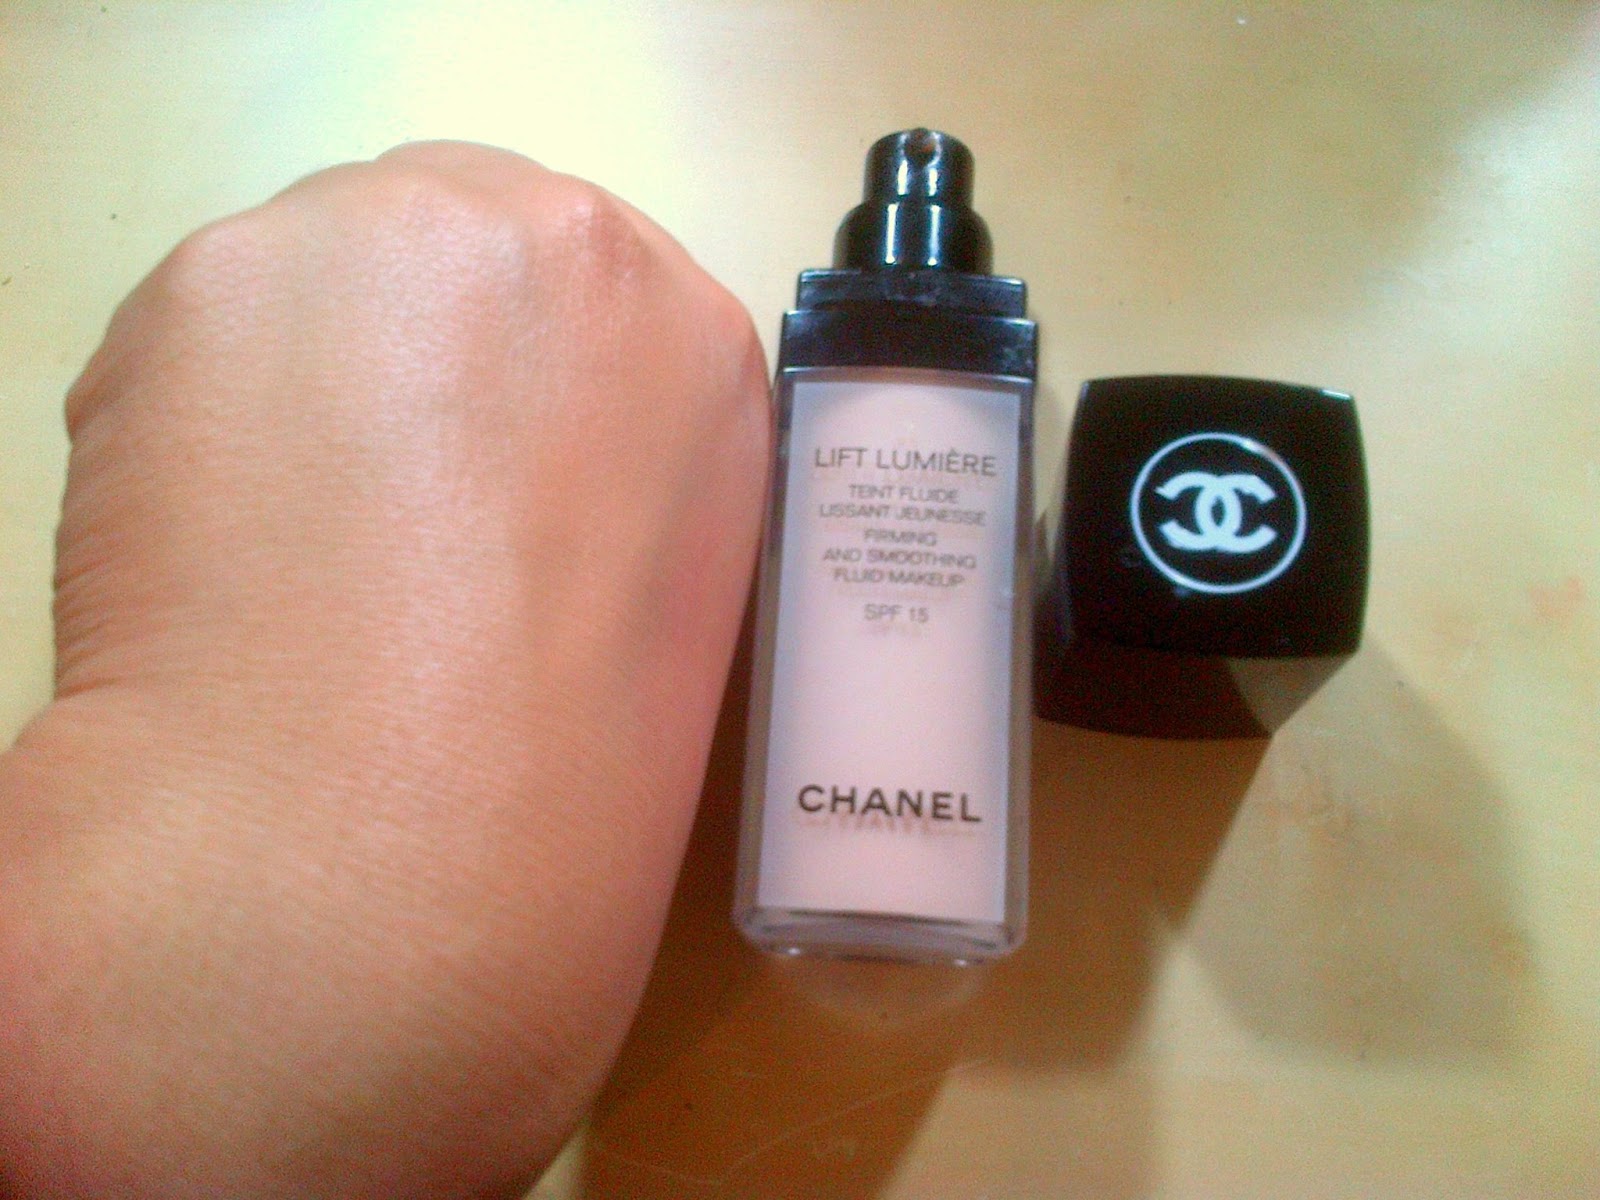 Chanel Lift Lumiere Firming & Smoothing Fluid Makeup SPF15